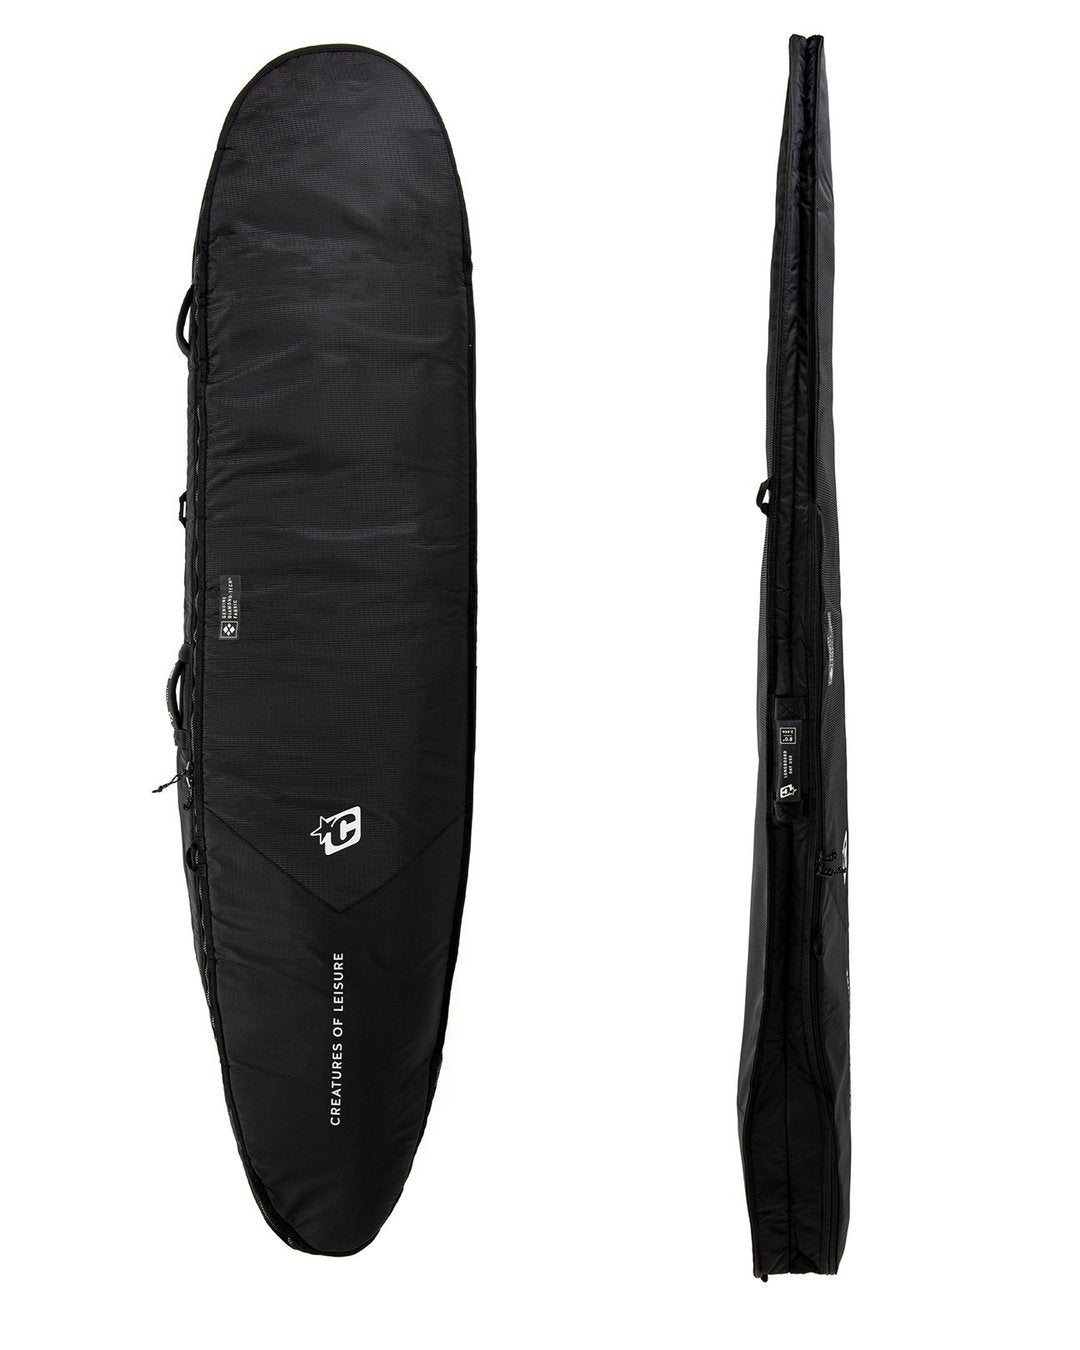 Creatures LONGBOARD DAY USE DT2.0 7'6" : BLACK SILVER - Board Store CreaturesBoardcover  